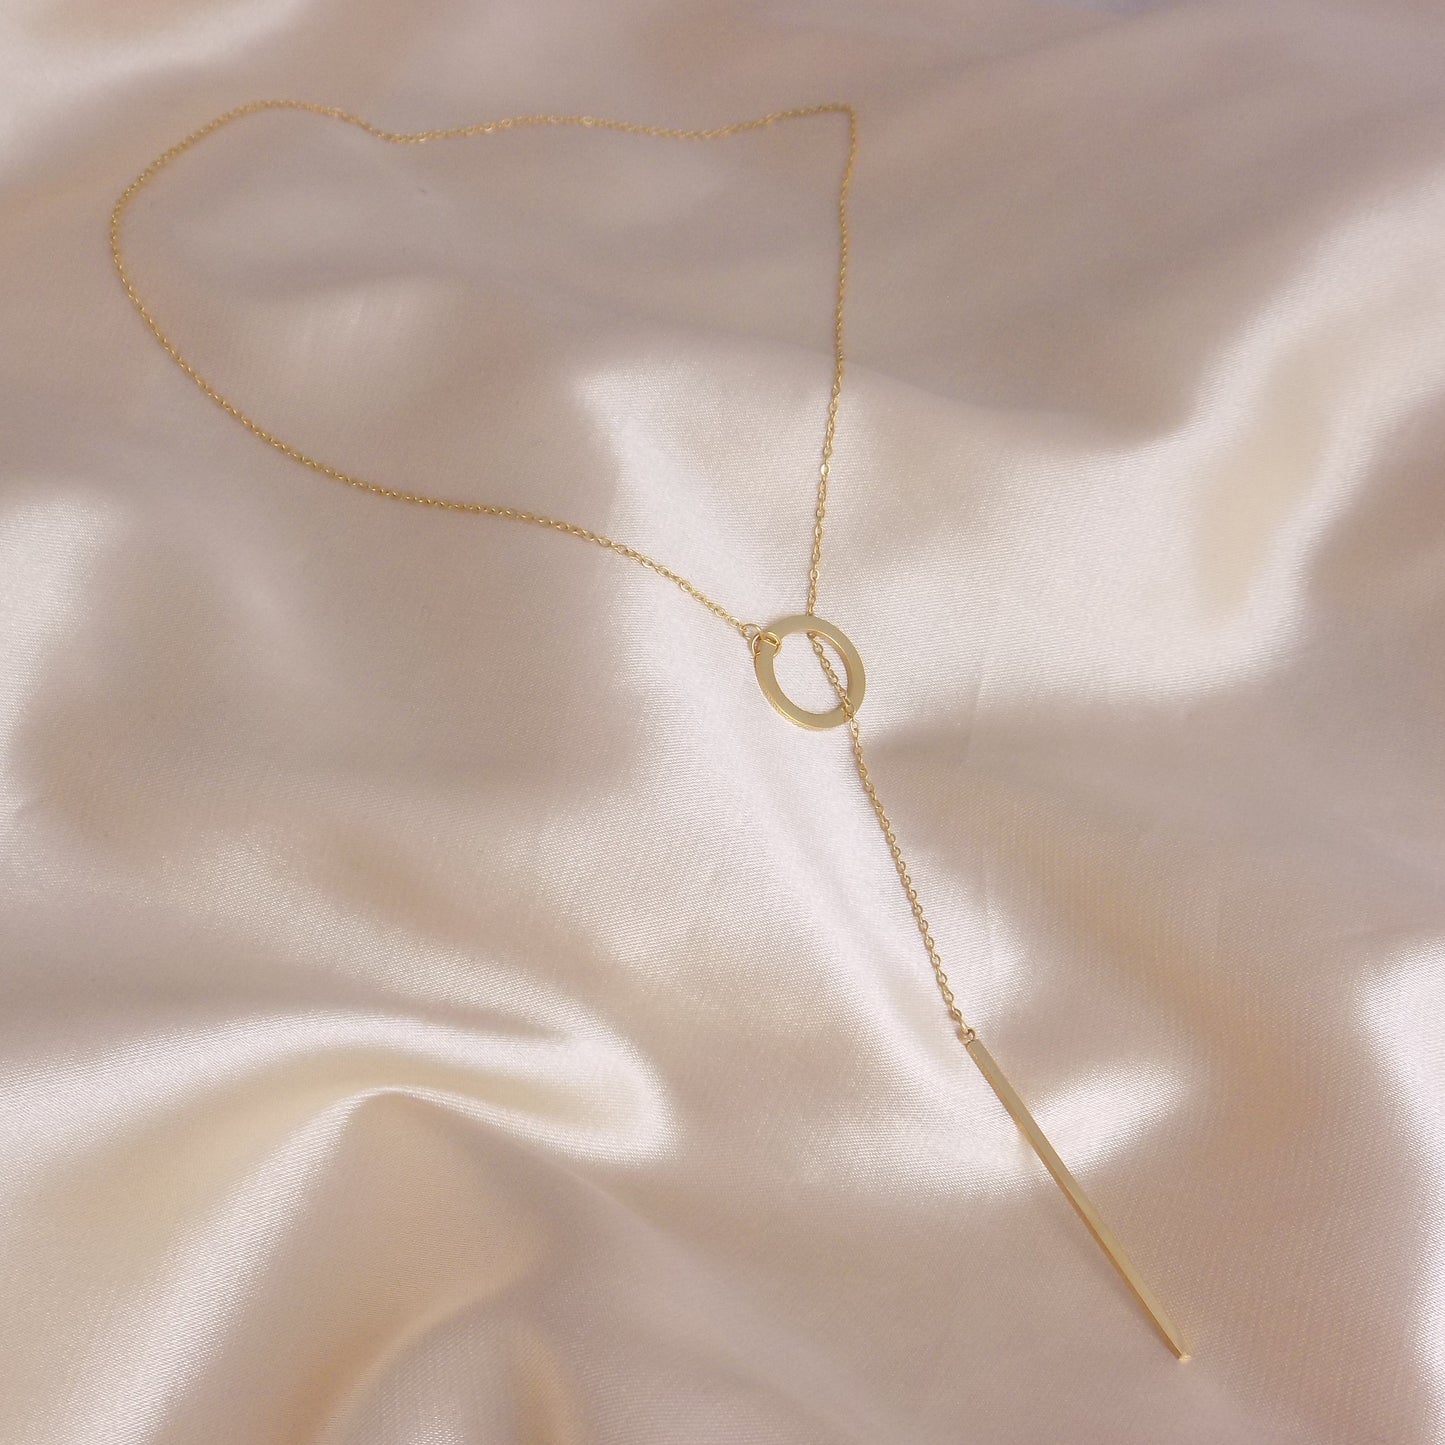 Gold Y Necklace - Dainty Adjustable Gold Necklace - Minimalist Jewelry